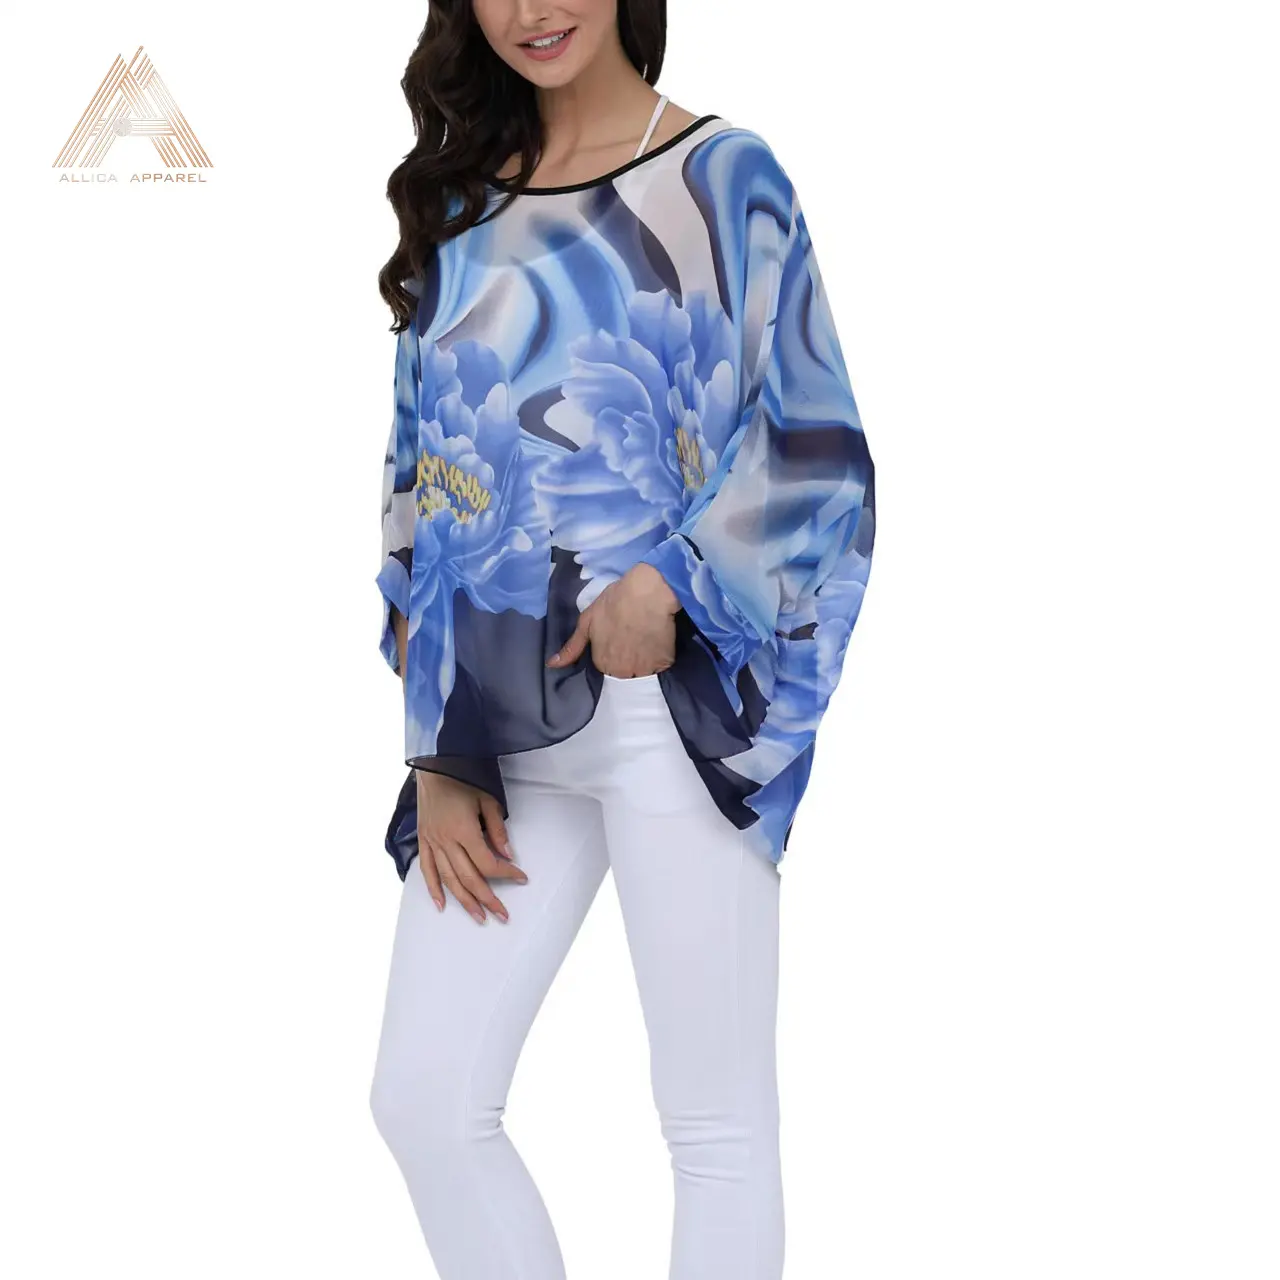 ALLICA 2022 Summer Batwing Sleeves Womens Top O-Neck Floral Print Chiffon Bohemian Style Beach Holiday Cover-ups Cape Top